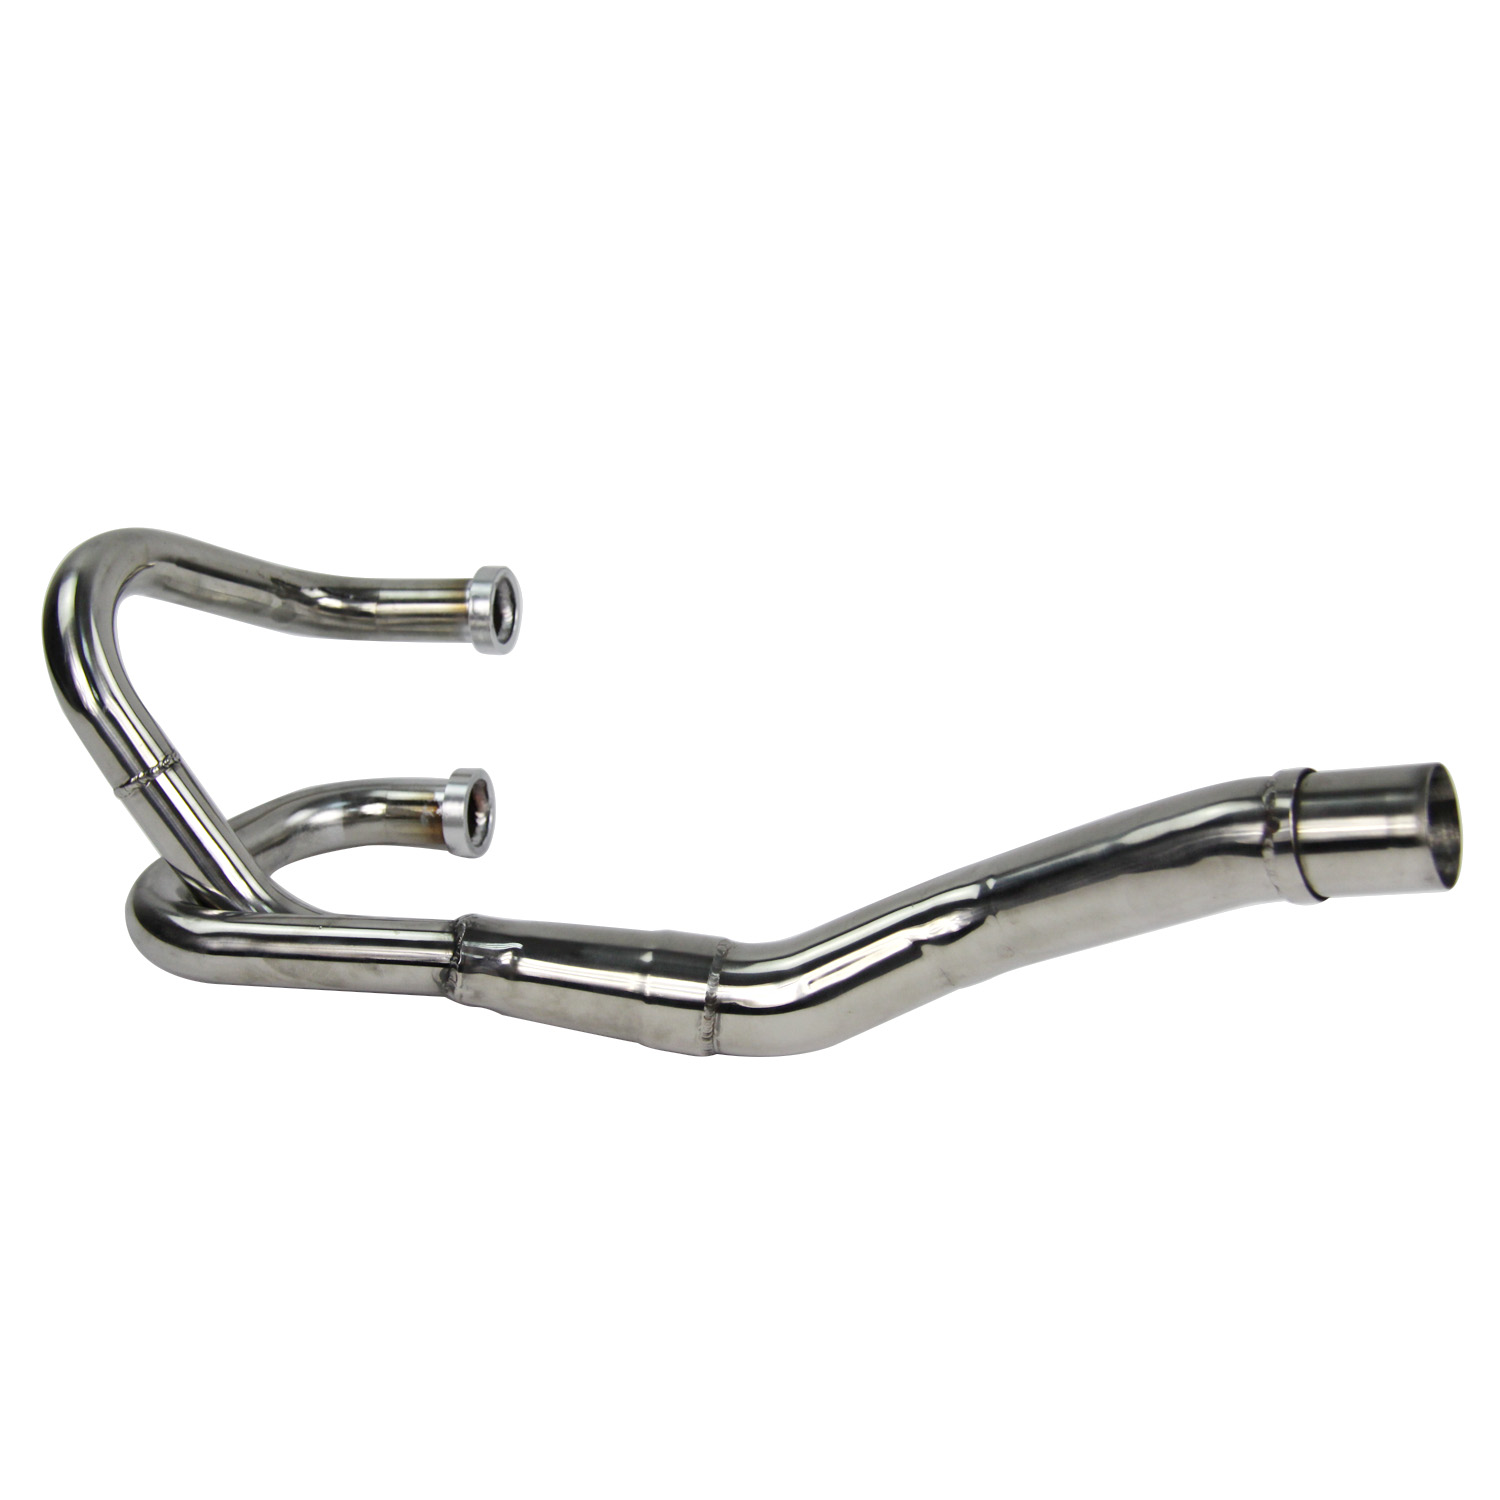 Chrome Stainless Steel Exhaust Header Tail Pipe for 1996-2004 2003 Honda XR400R